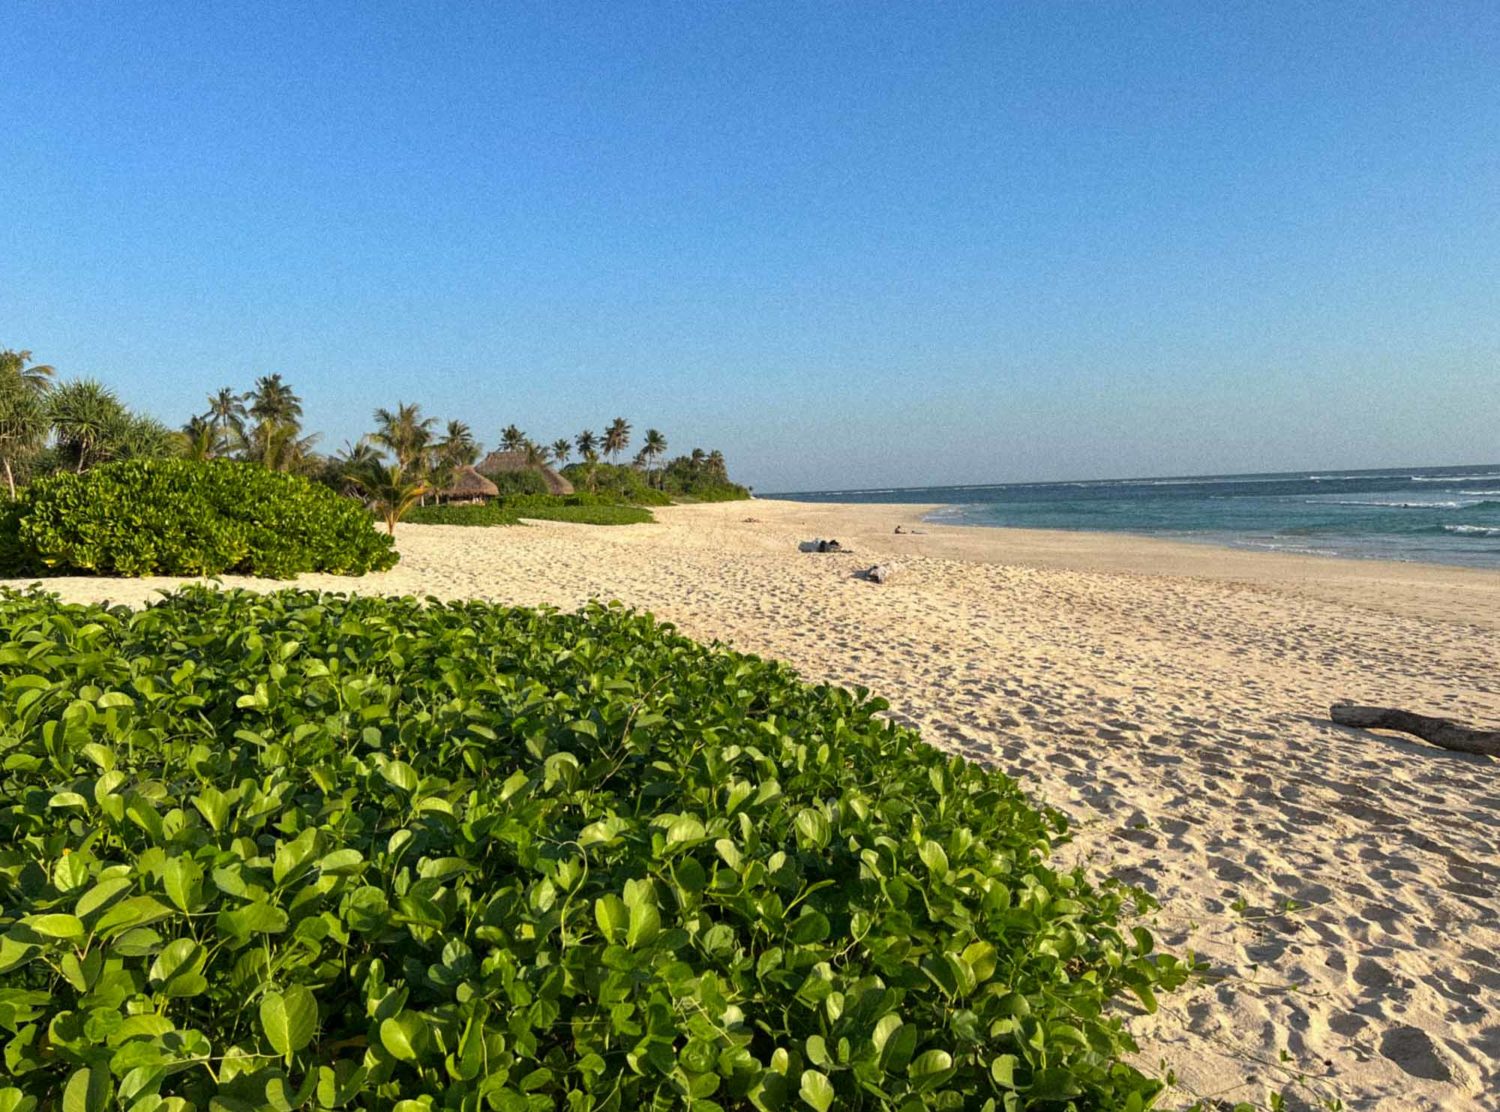 The Sanubari The Sanubari’s beautiful wild beach is dotted with tropical vegetation such as mangroves and palm trees